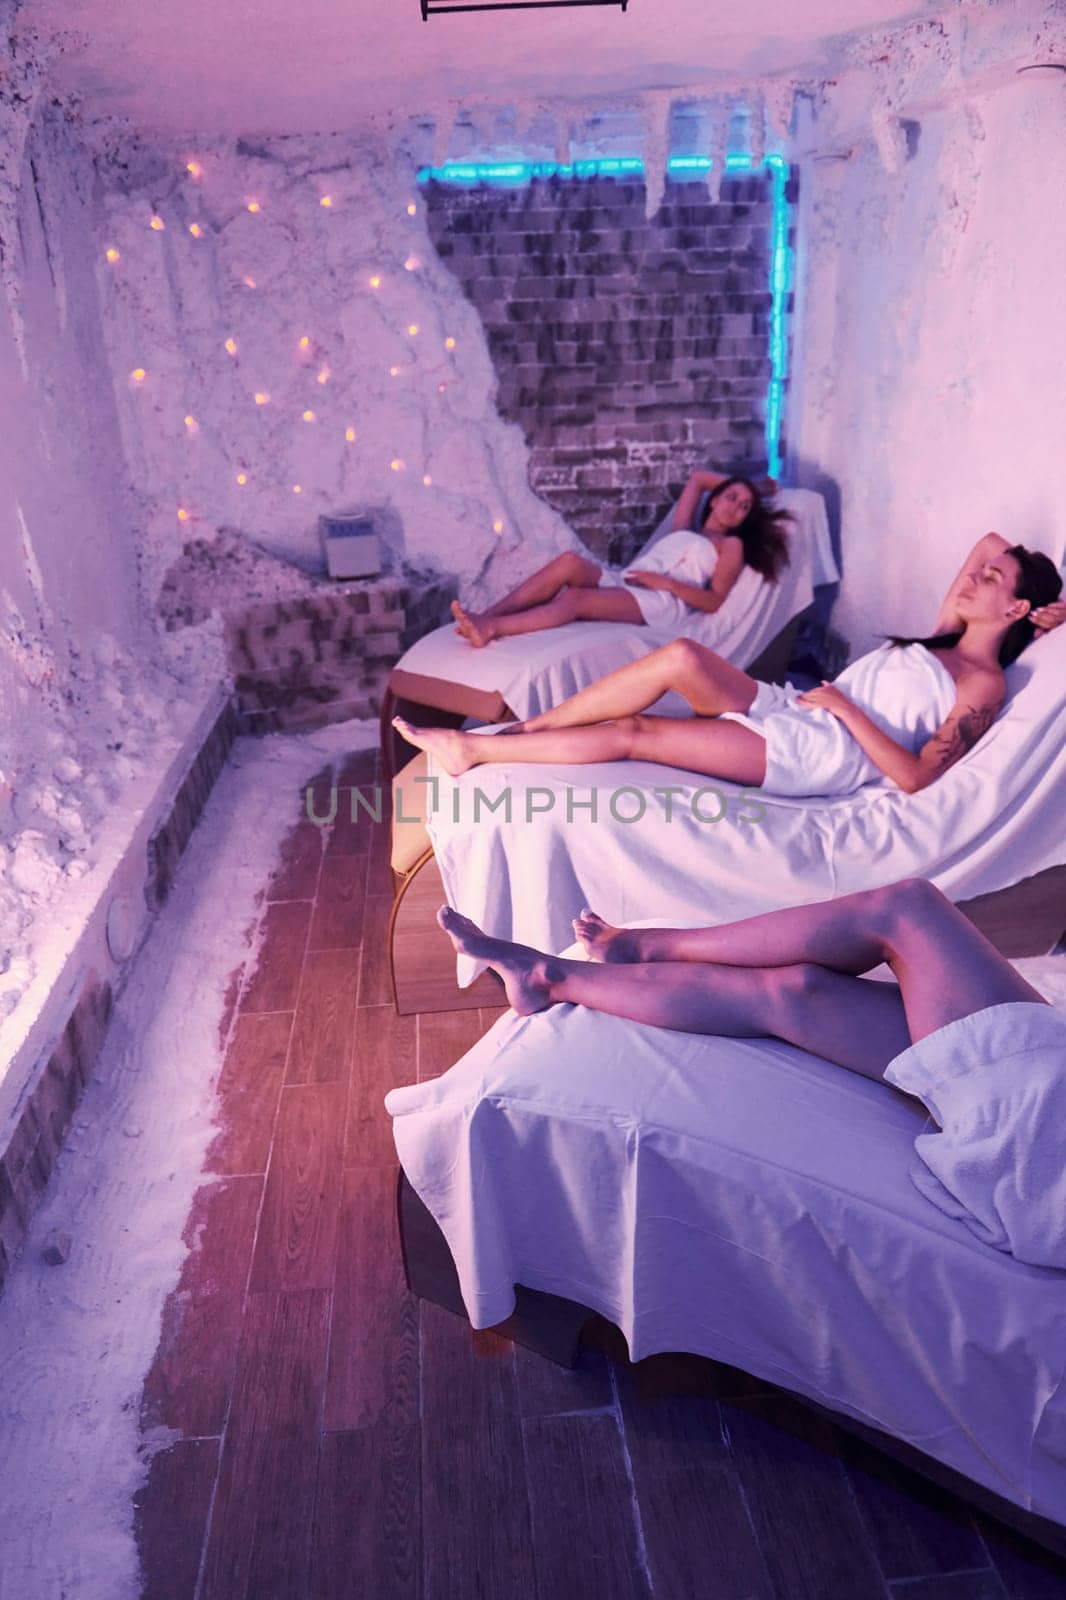 Young women in white towels lying down on beds indoor in room with violet decor by Standret